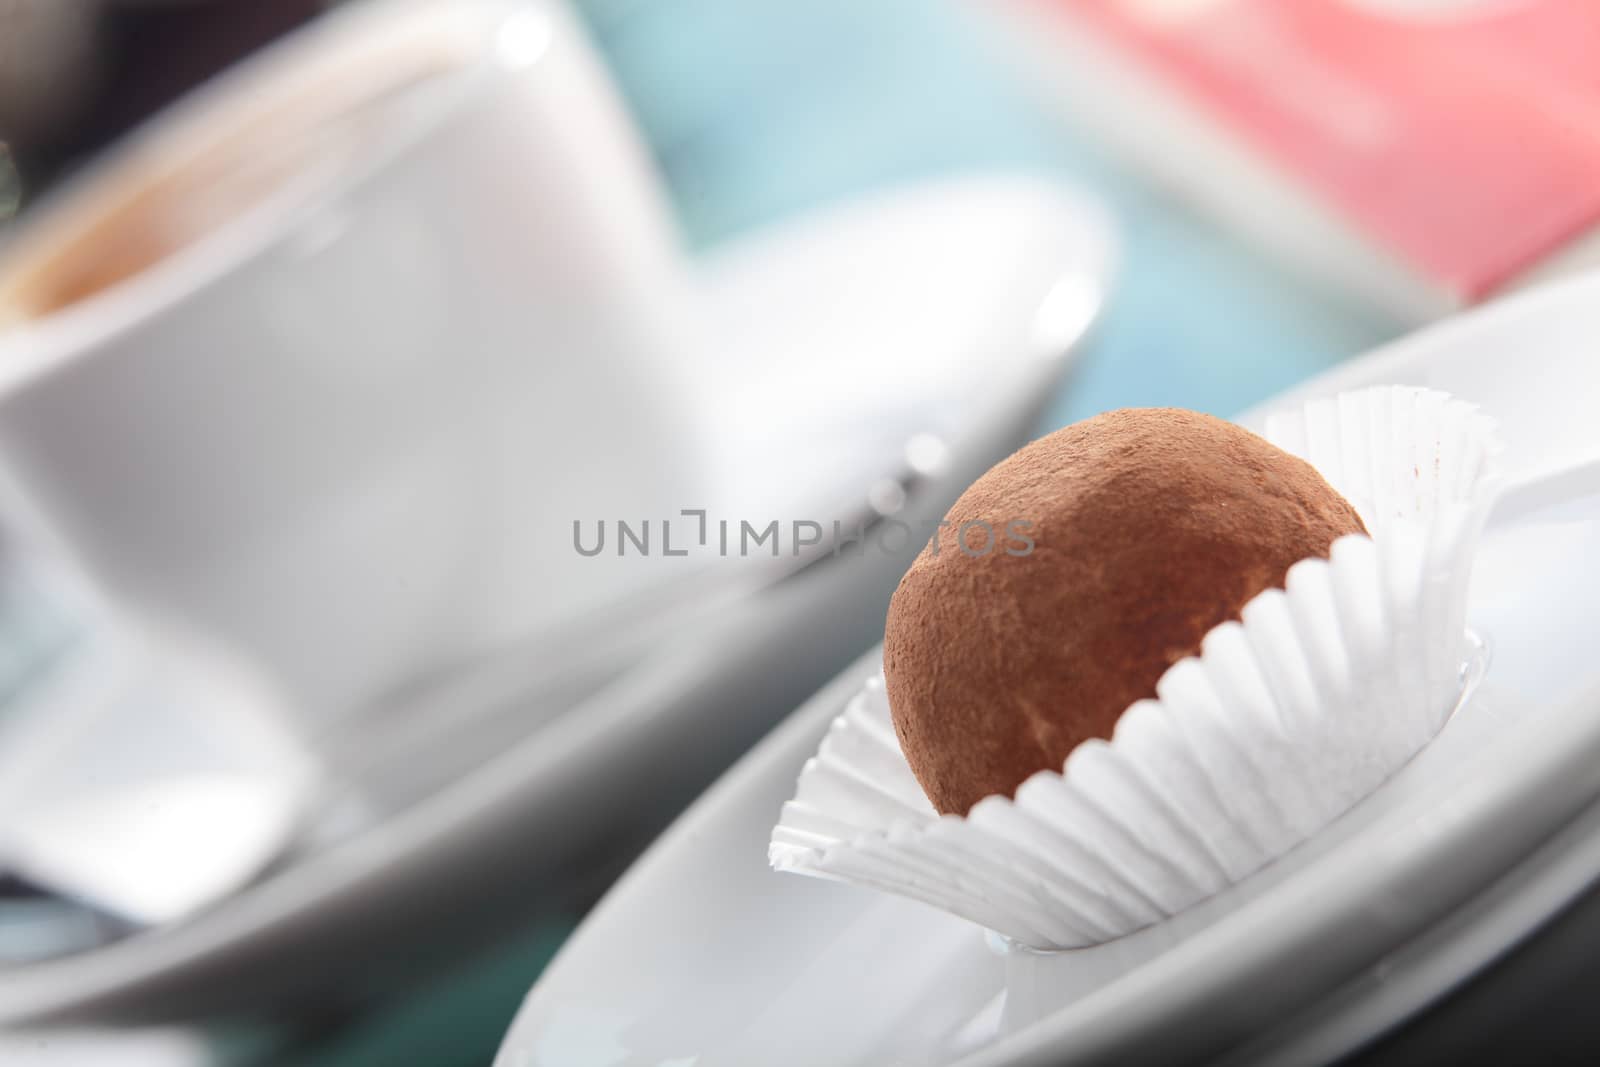 sweet truffle on white papper bag by fiphoto